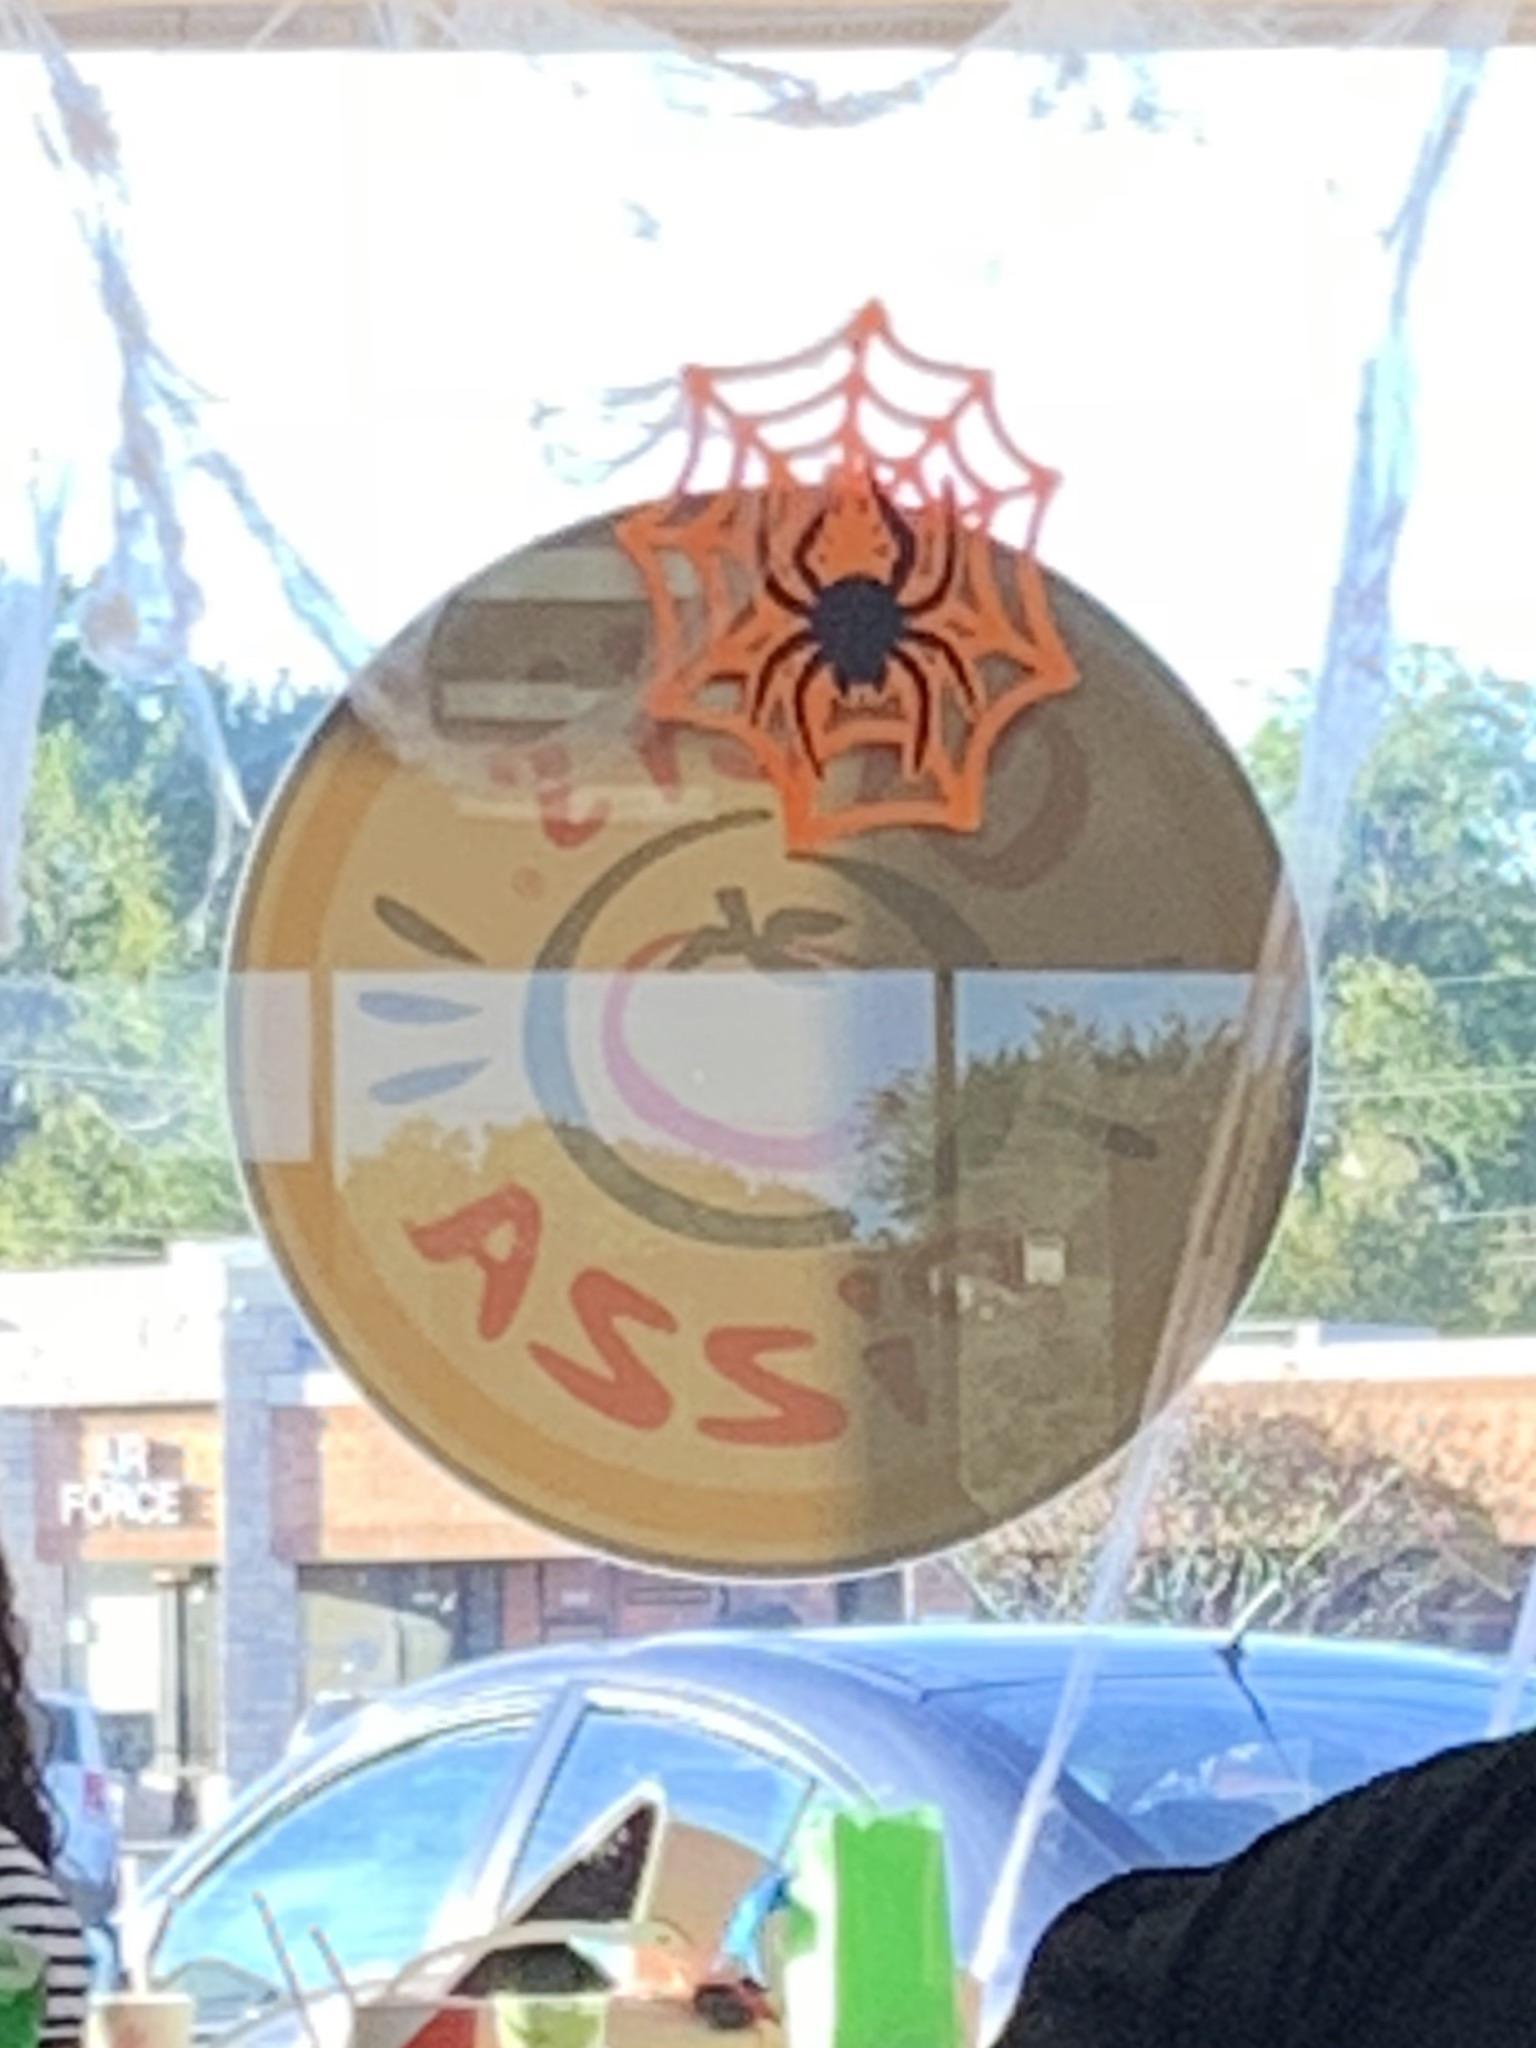 Cici's Pizza Logo - I think the Cici's Pizza logo is trying to tell me something